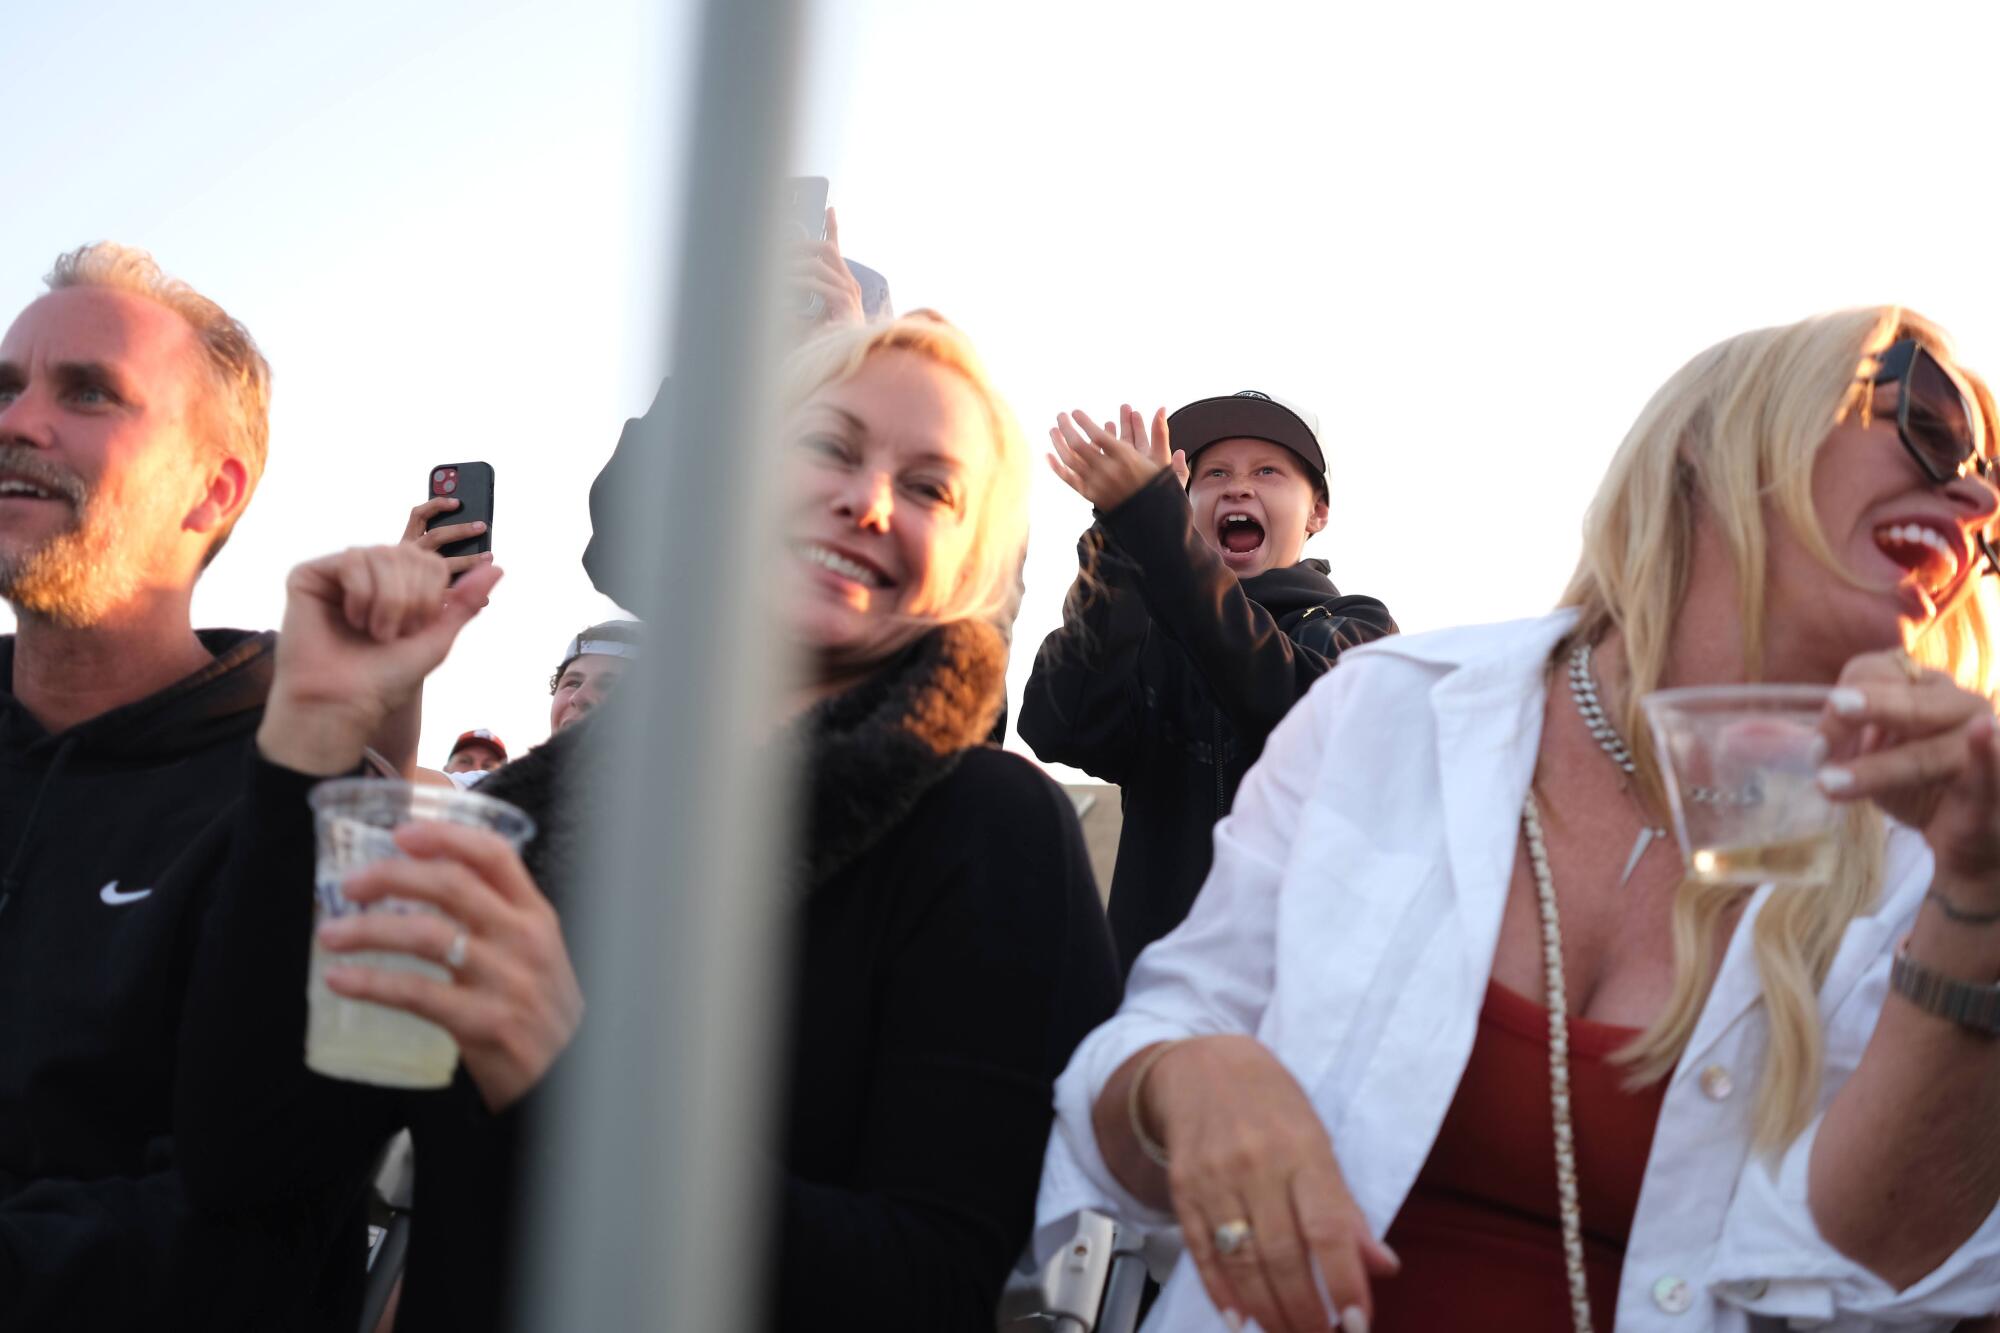 Two blond women holding white wine and a man and child in black laugh and cheer.